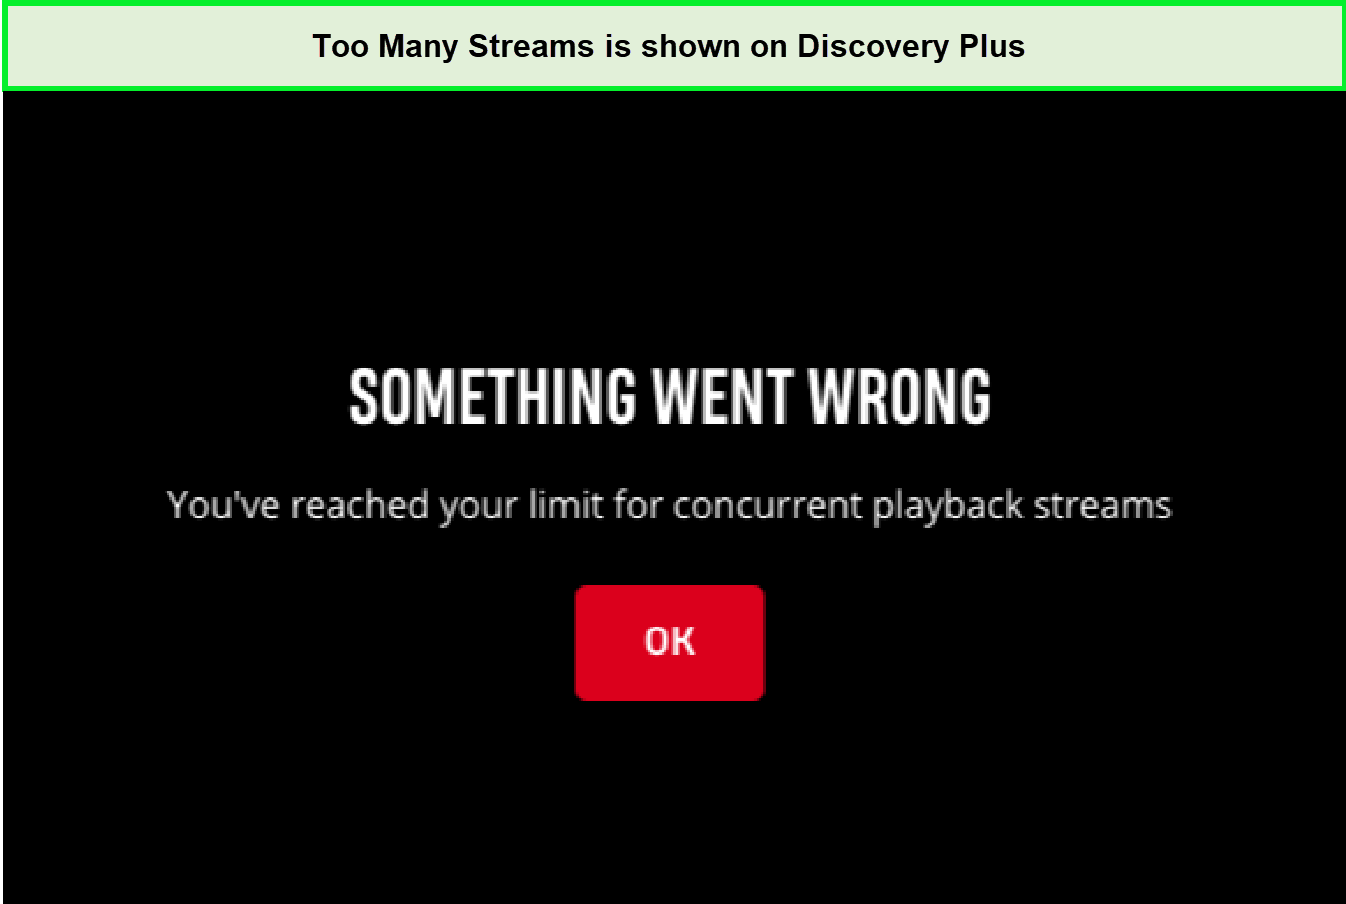 discovery-plus-too-many-streams-error-in-France